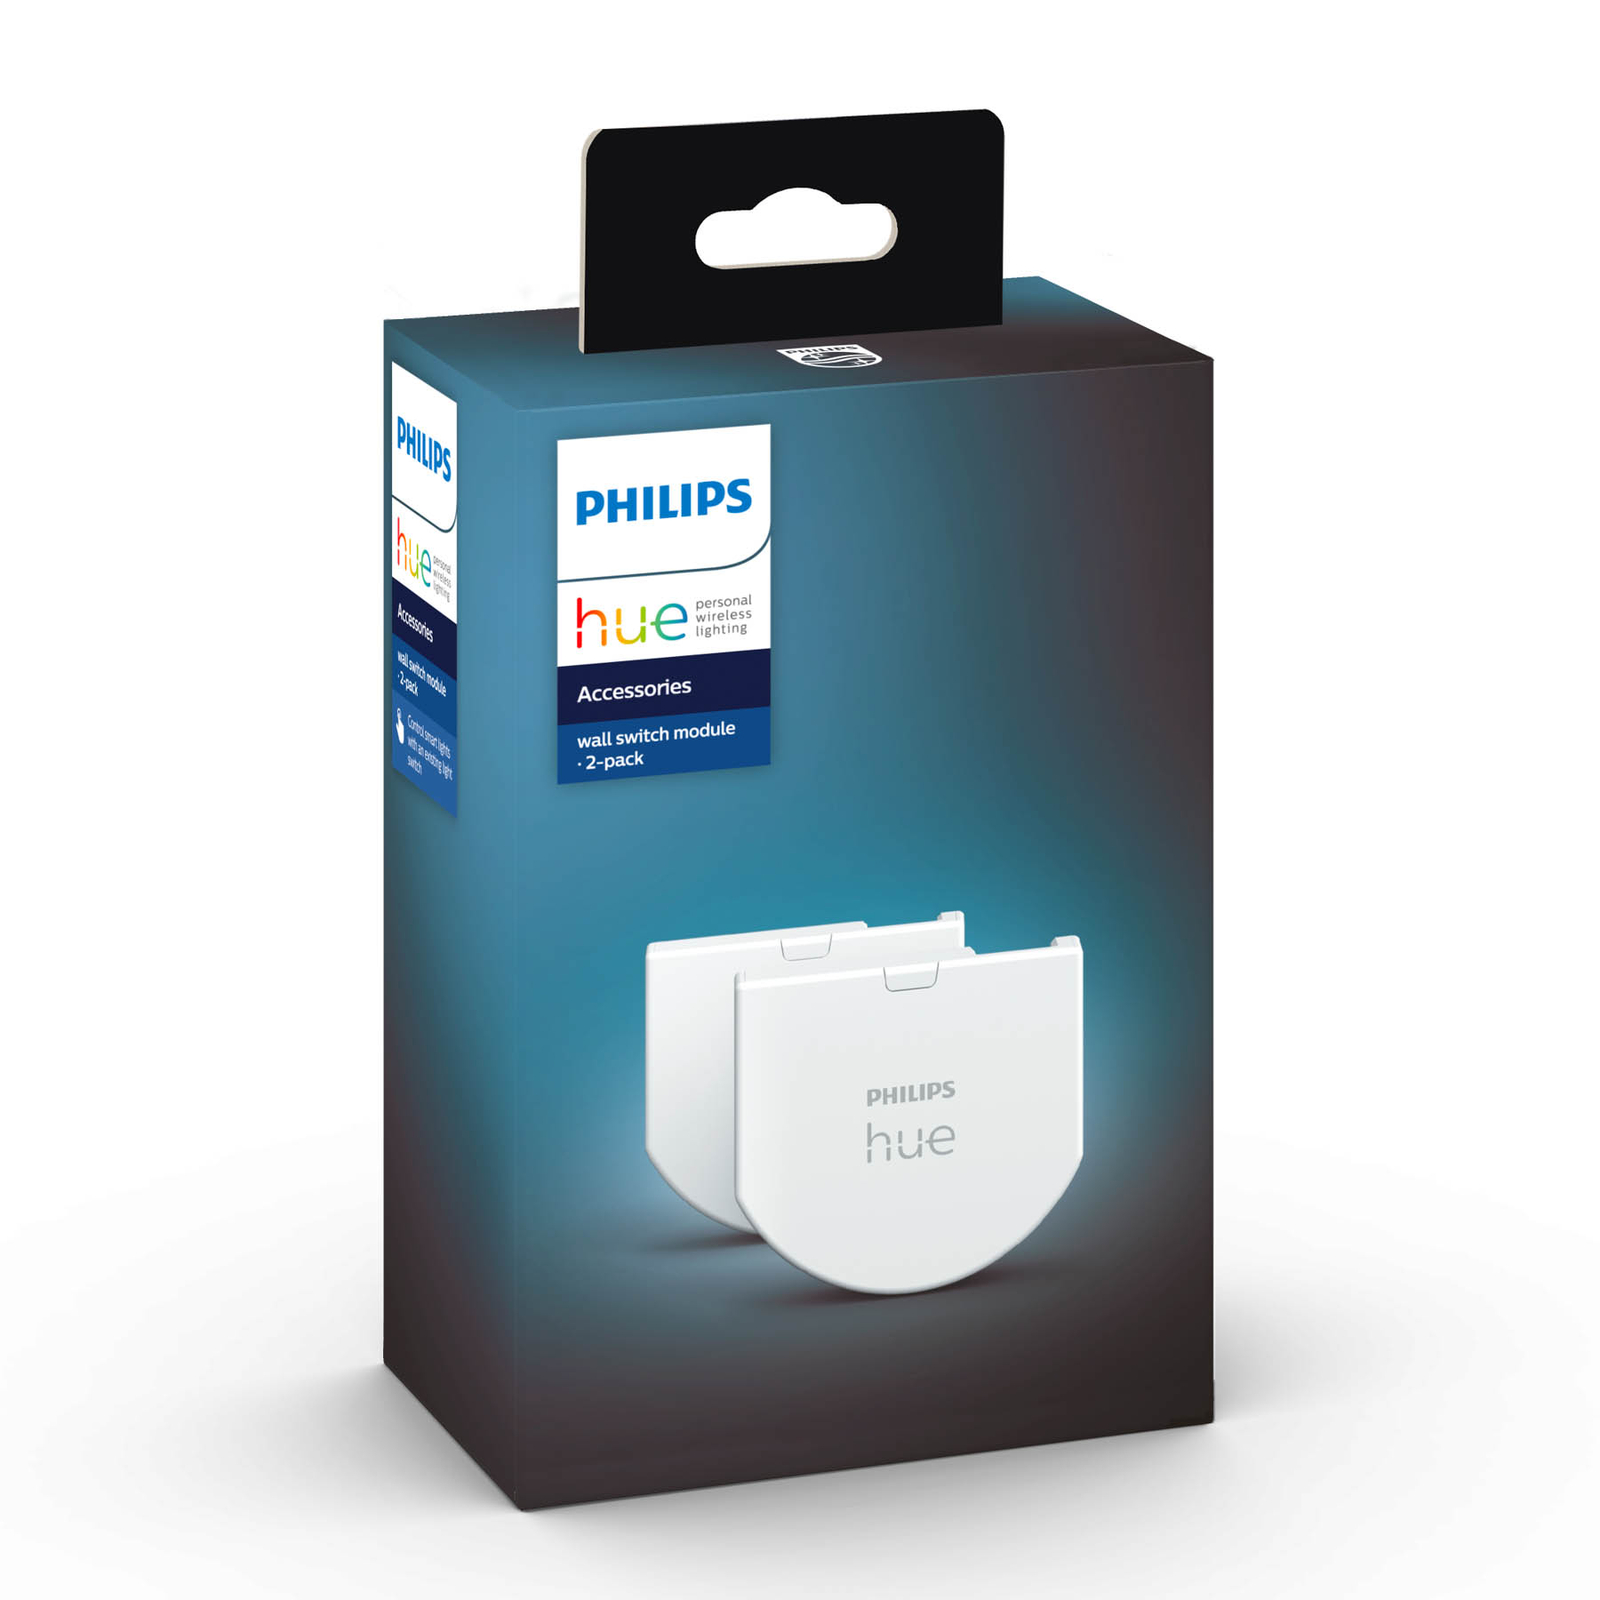 Philips Hue wall switch module, 2-pack